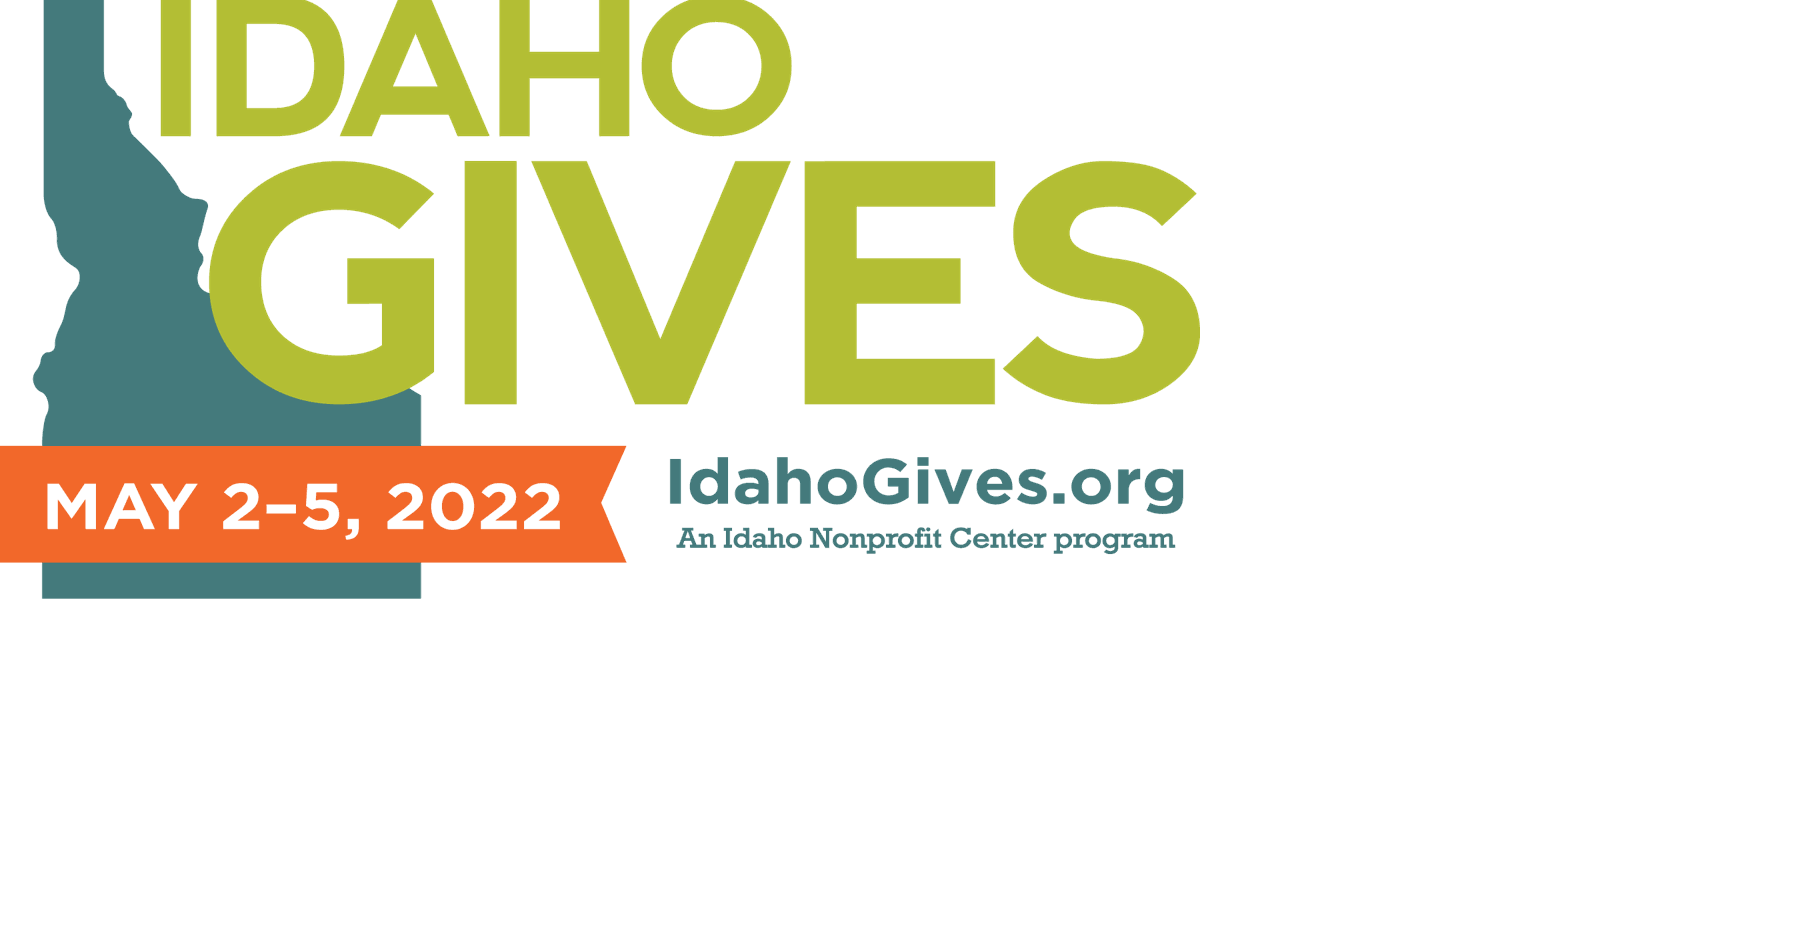 Idaho Gives Event is Coming Up Next Week